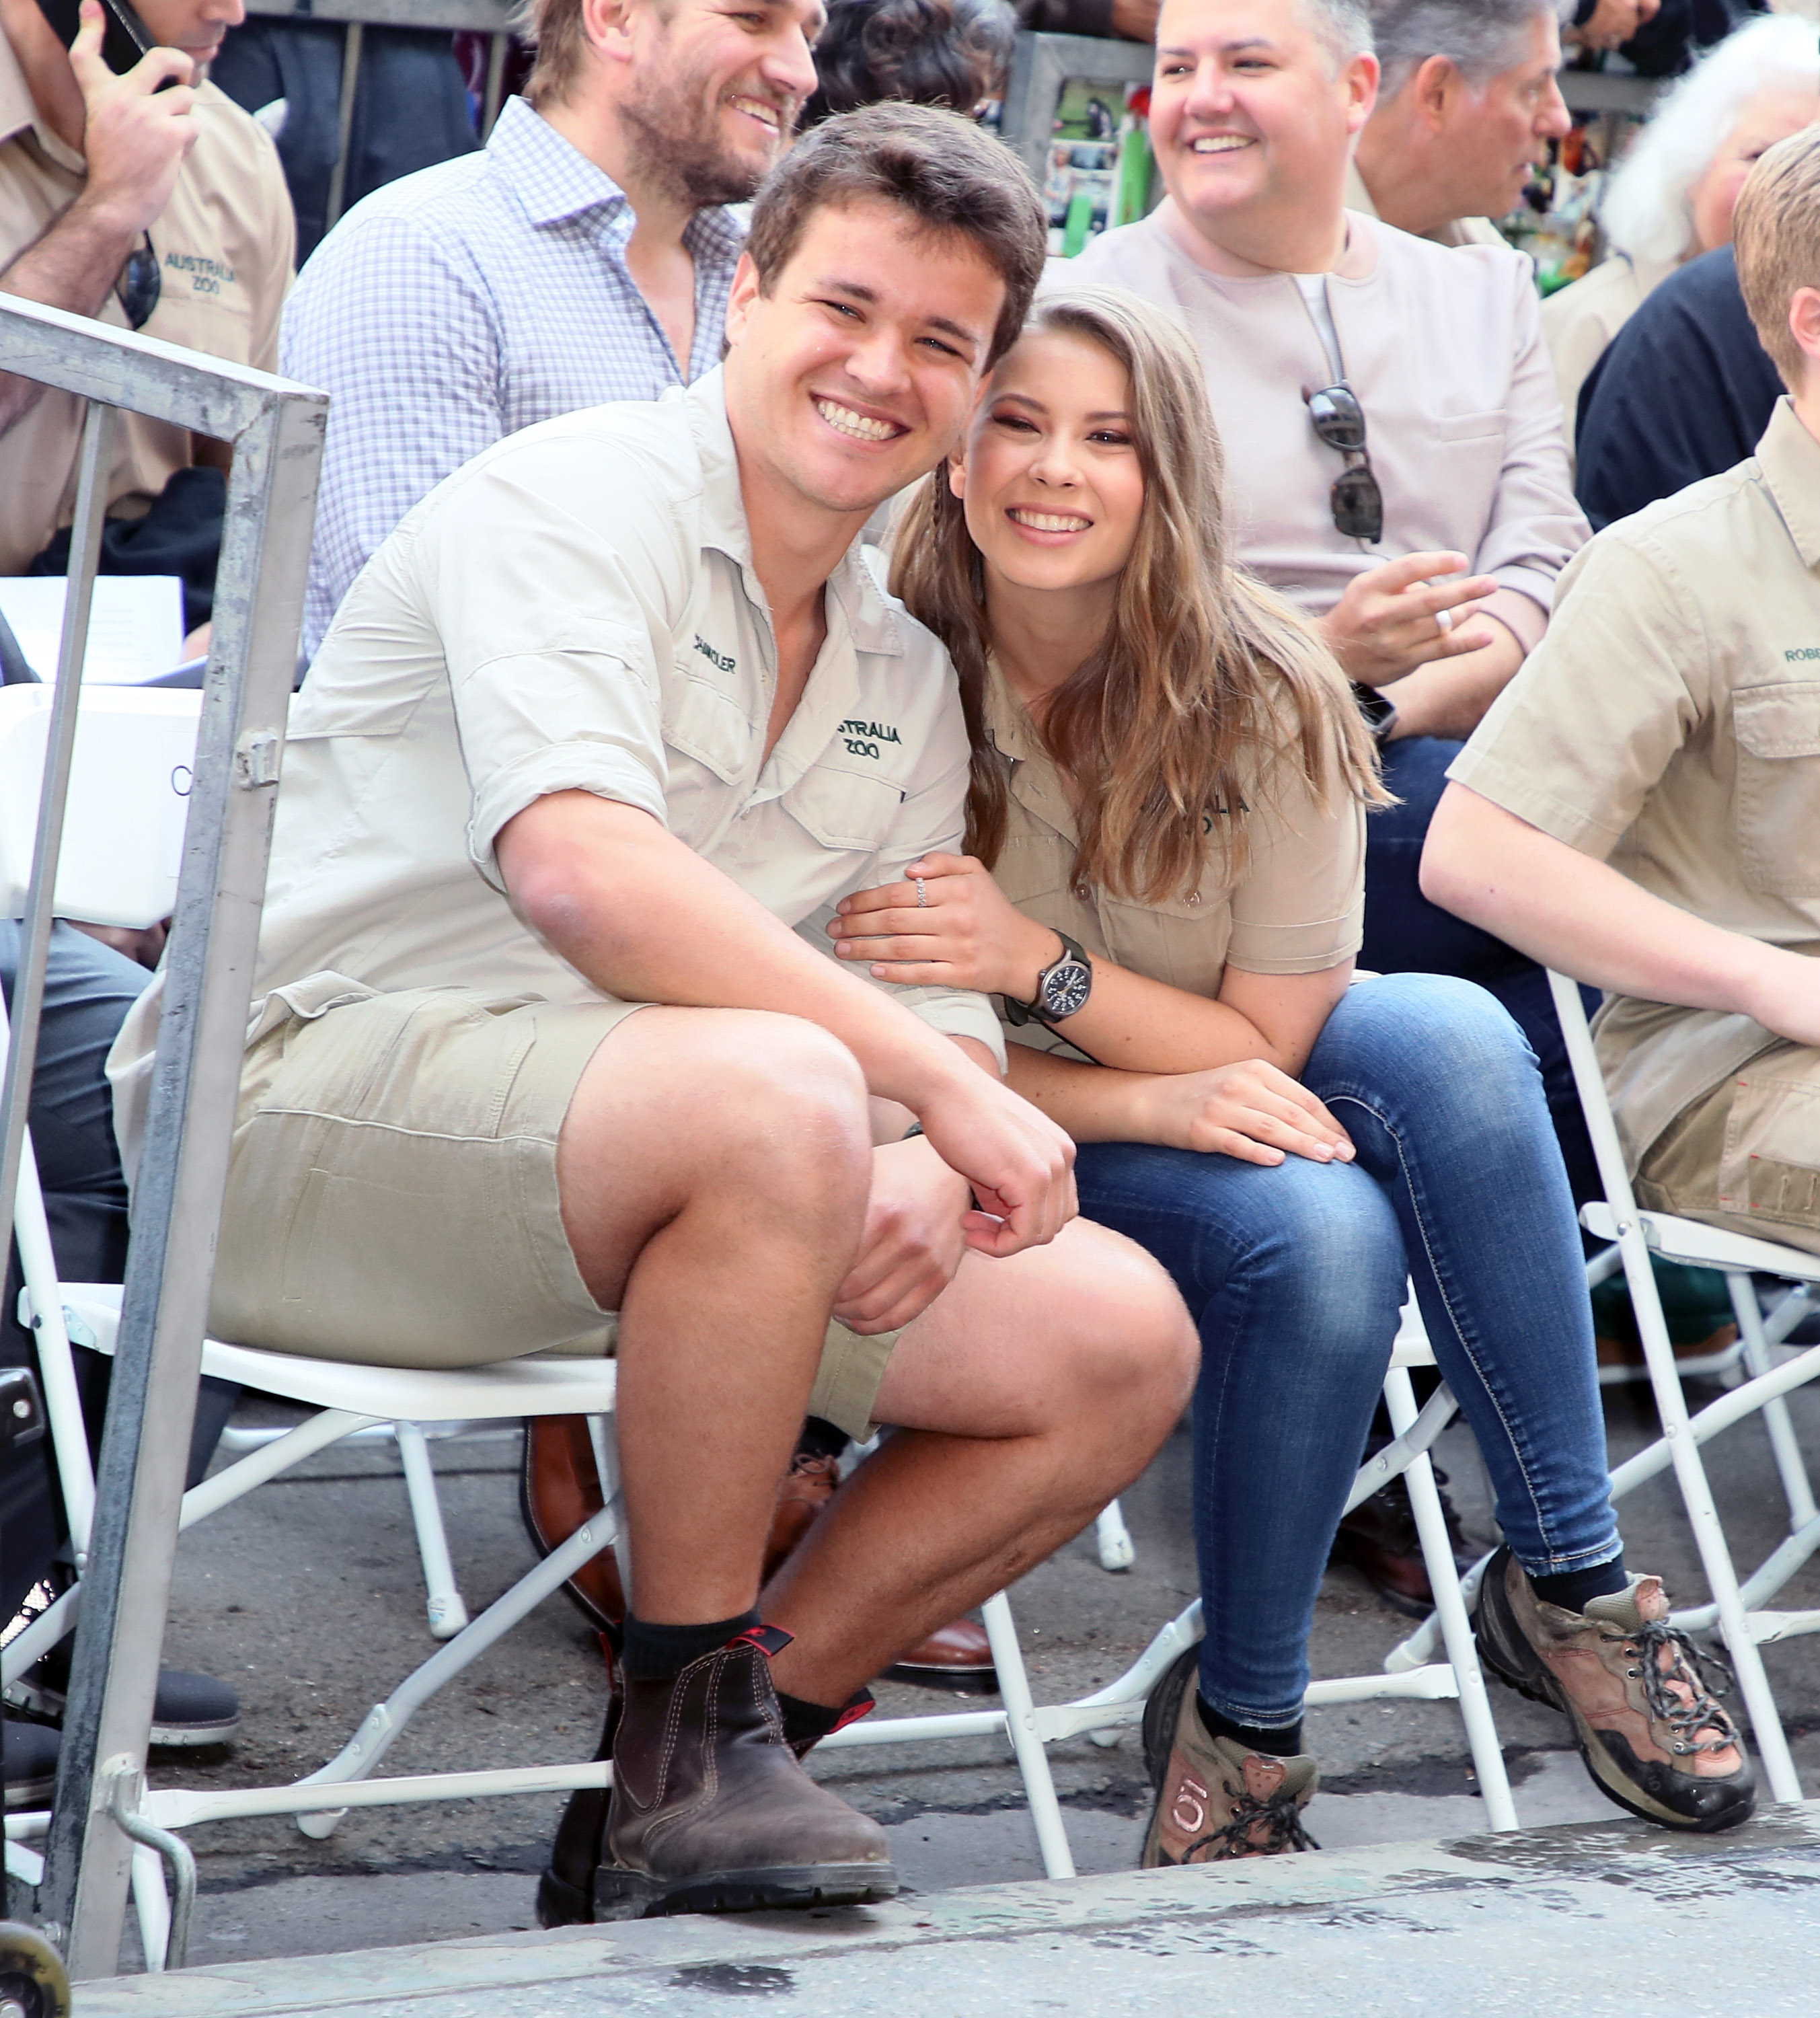 Chandler Powell and Bindi Irwin at the ceremony posthomously honoring Steve Irwin with a star on the Hollywood Walk of Fame on April 26, 2018, in Hollywood, California | Source: Getty Images